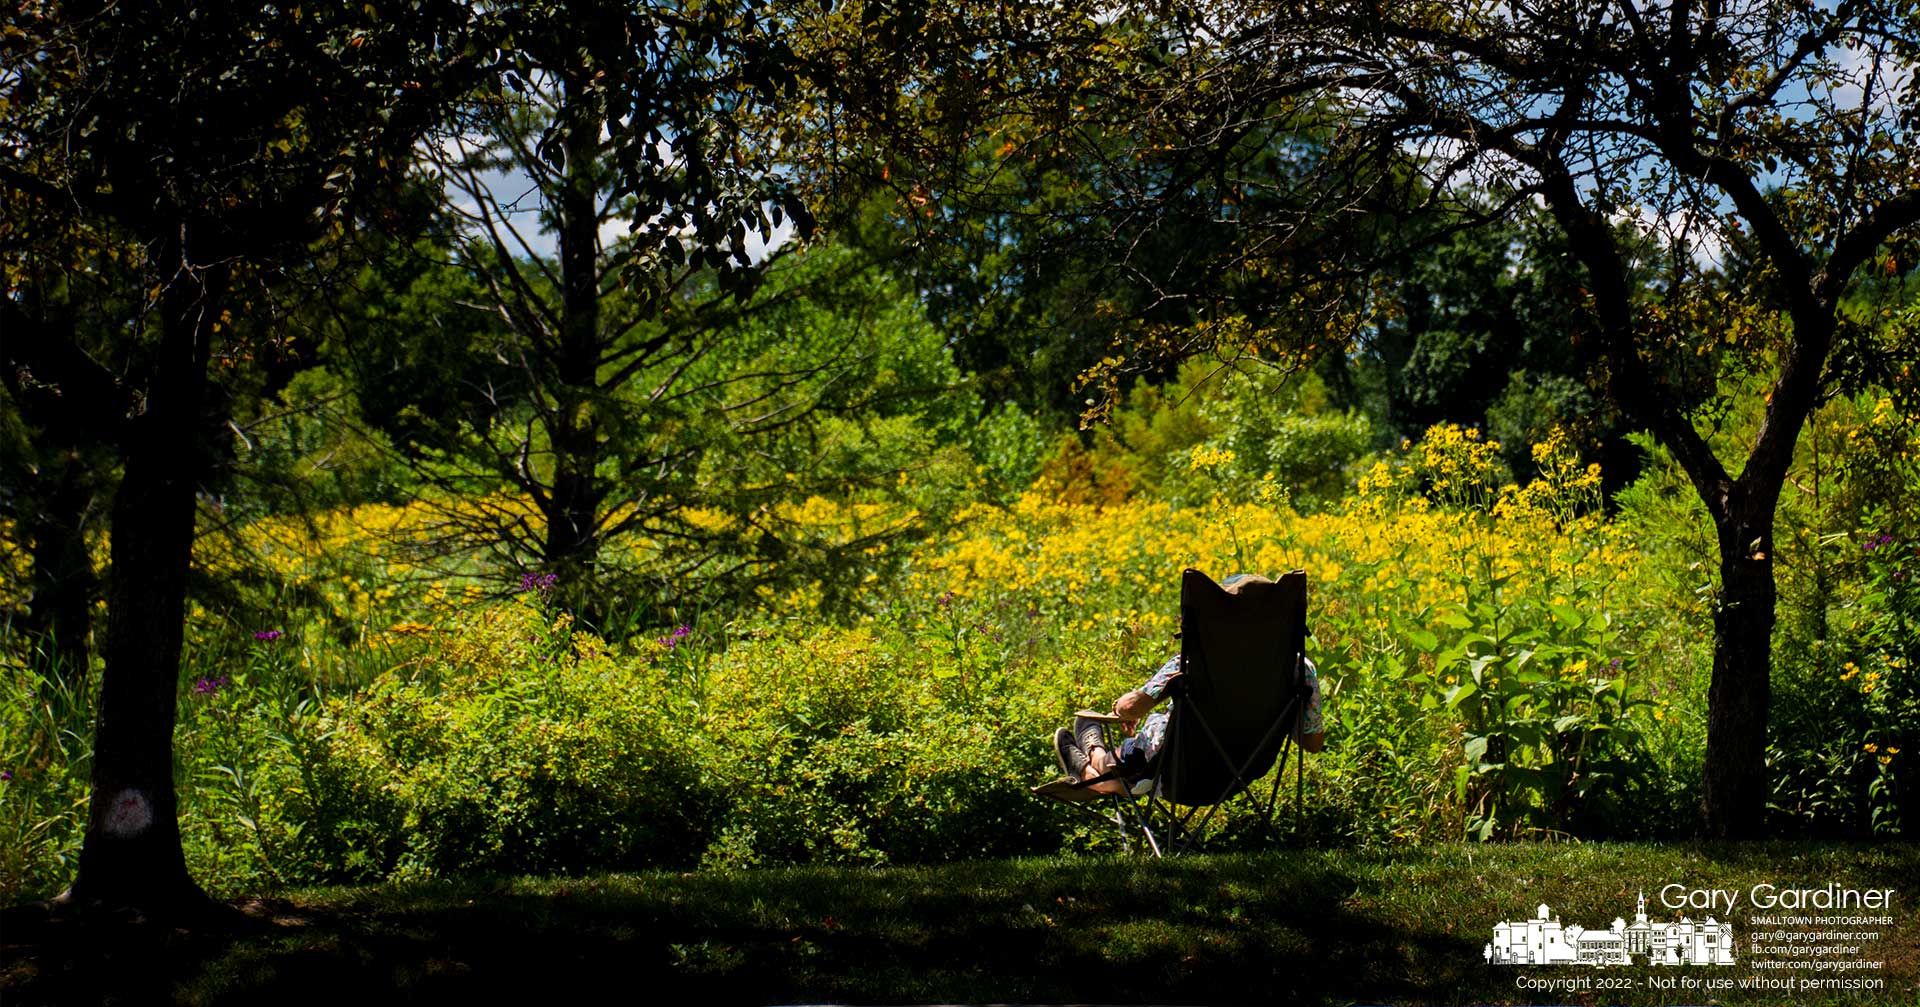 A man sits in a portable chair beside the wetlands at Highlands Park where he relaxes for s few moments during recovery from a medical problem. My Final Photo for August 12, 2022.